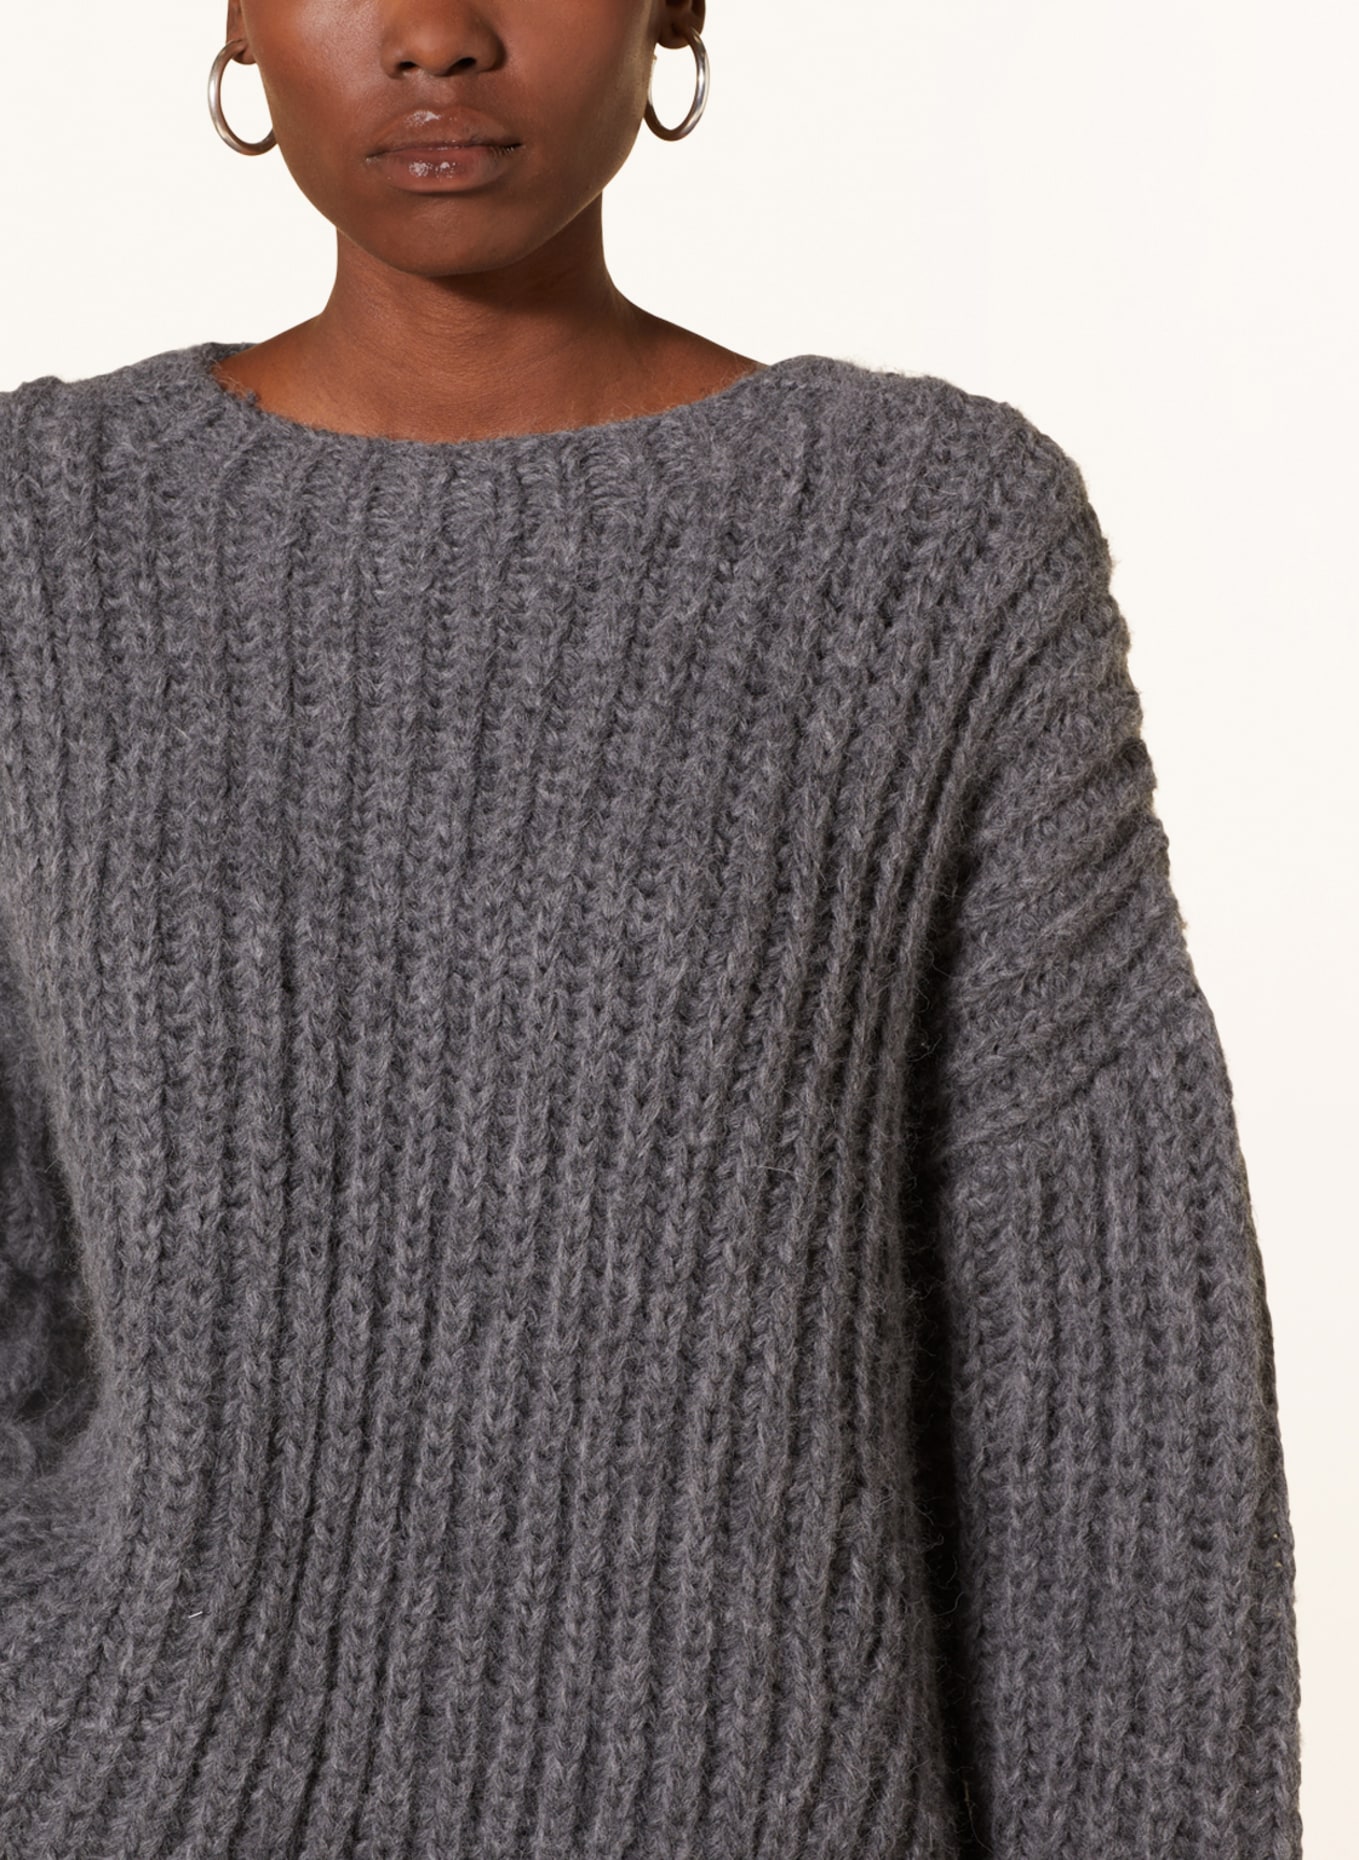 MAIAMI Oversized sweater made of alpaca, Color: GRAY (Image 4)